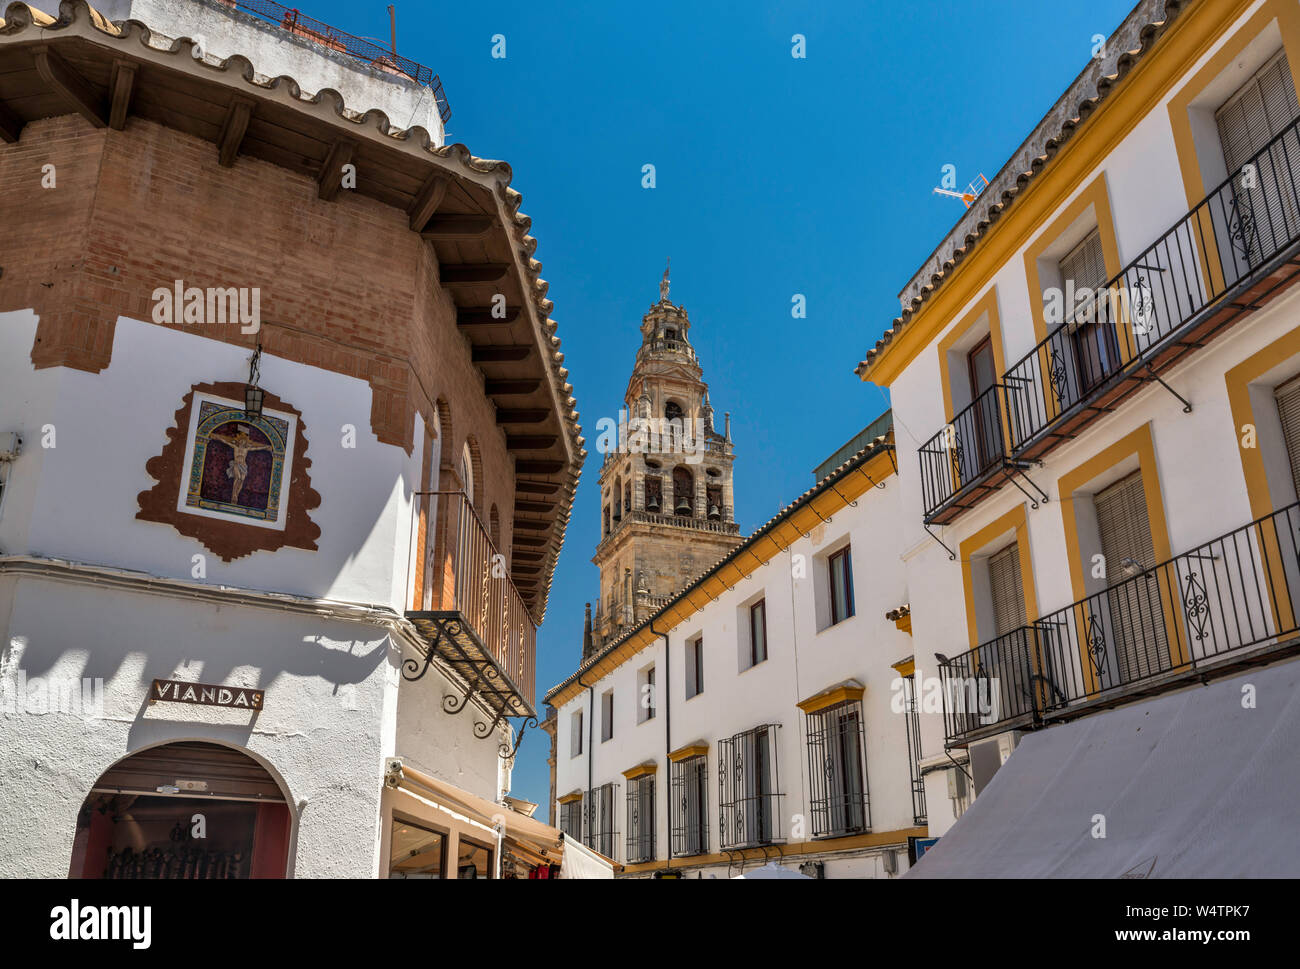 Bell tower at Mezquita-Catedral seen from street in Juderia district, Cordoba, Andalusia, Spain Stock Photo